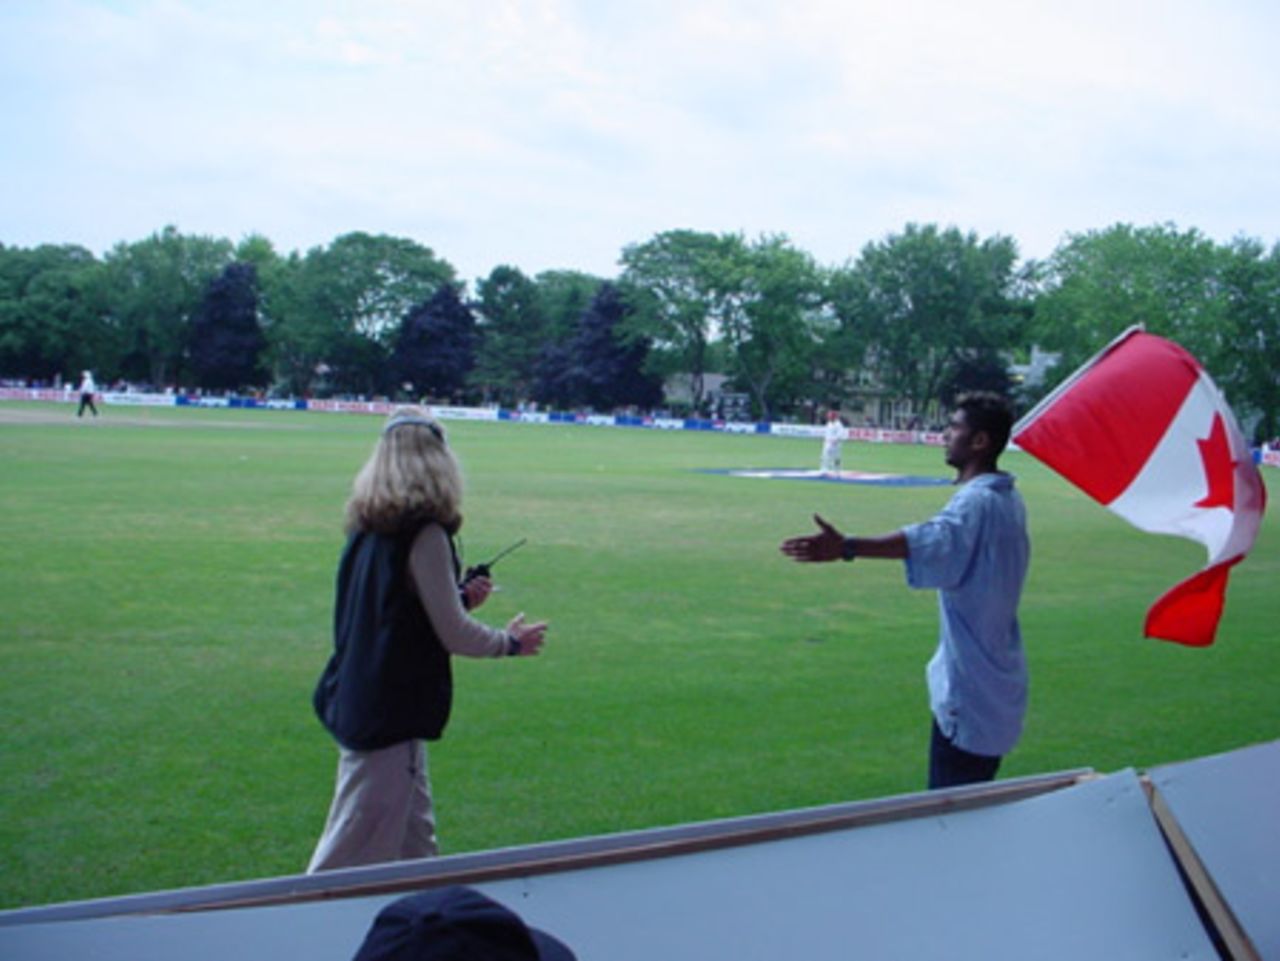 A happy flag-bearing Canadian fan wanders around the boundary after the end of the Scotland innings as a television crew member tries to keep him outside the rope. ICC Trophy 2001: Canada v Scotland at Toronto, Cricket, Skating and Curling Club, 17 July 2001.